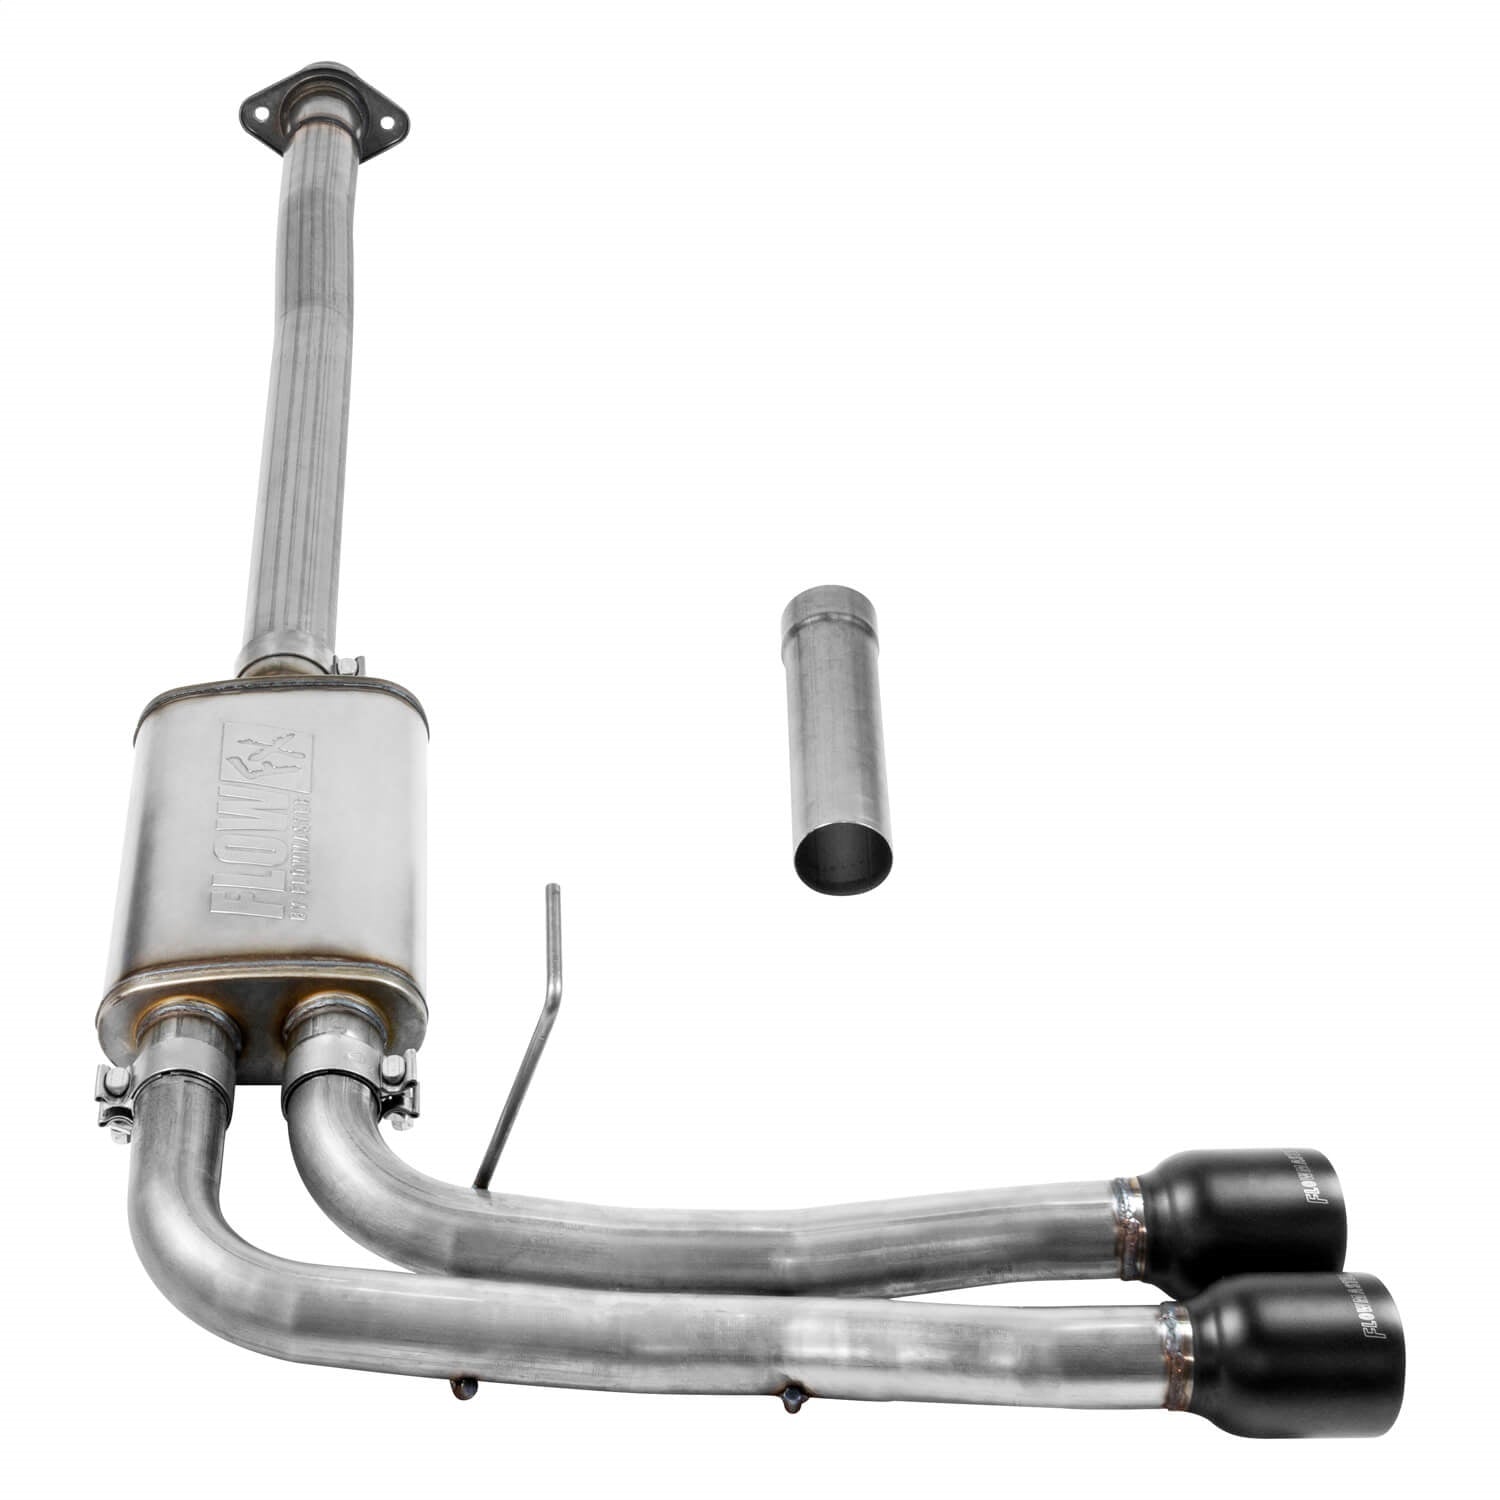 Flowmaster 717785 FlowFX Cat-Back Exhaust System Fits 15-19 F-150